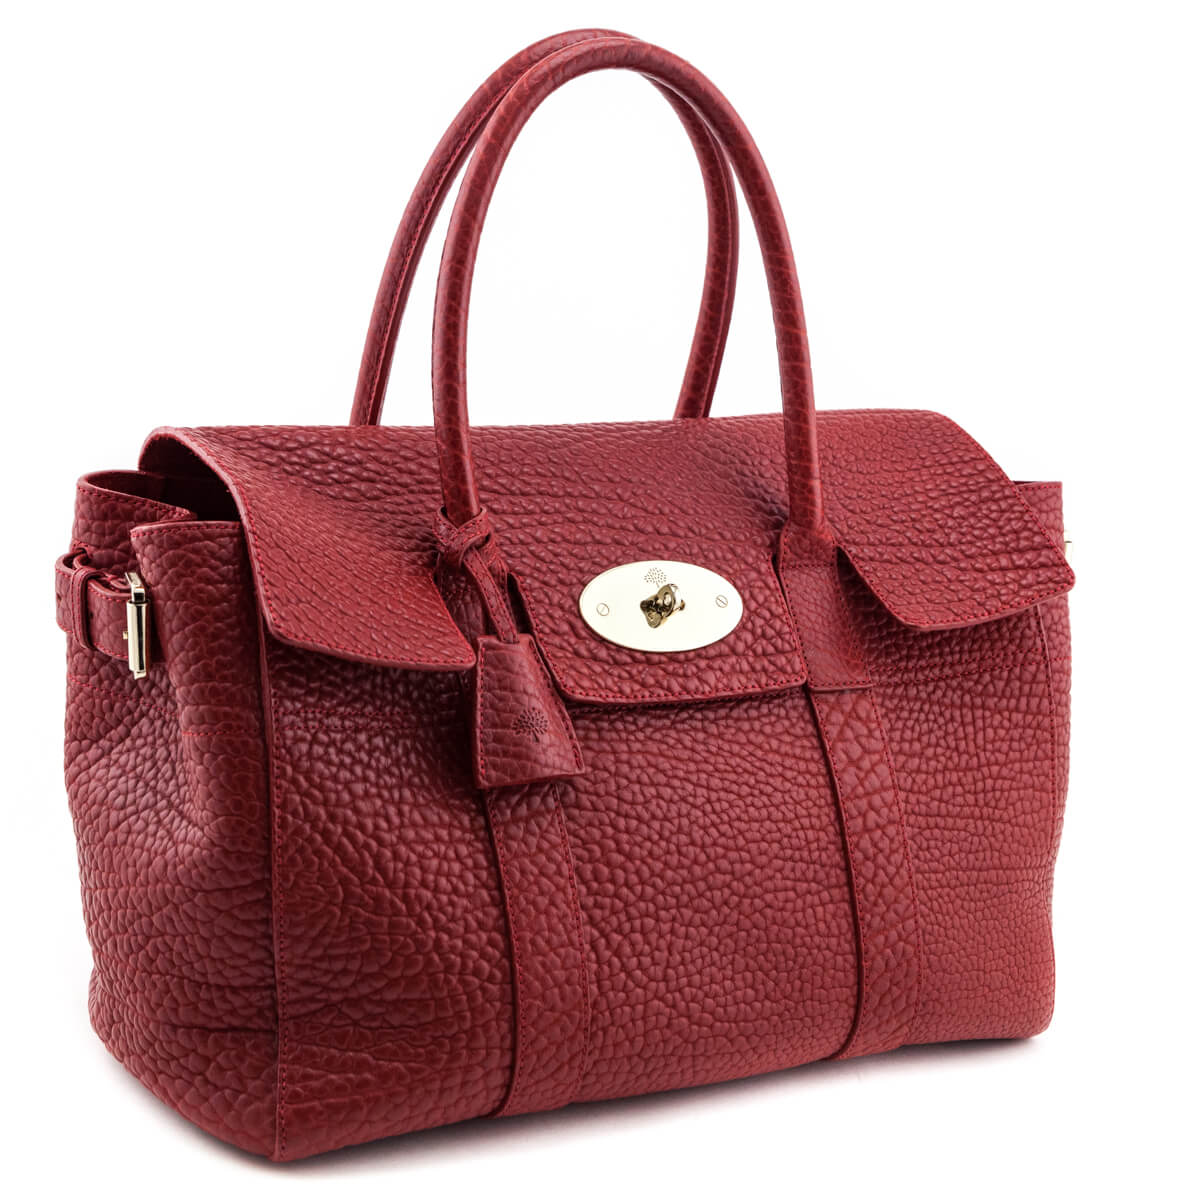 Mulberry Poppy Red Shrunken Calf Bayswater Buckle Tote - Love that Bag etc - Preowned Authentic Designer Handbags & Preloved Fashions